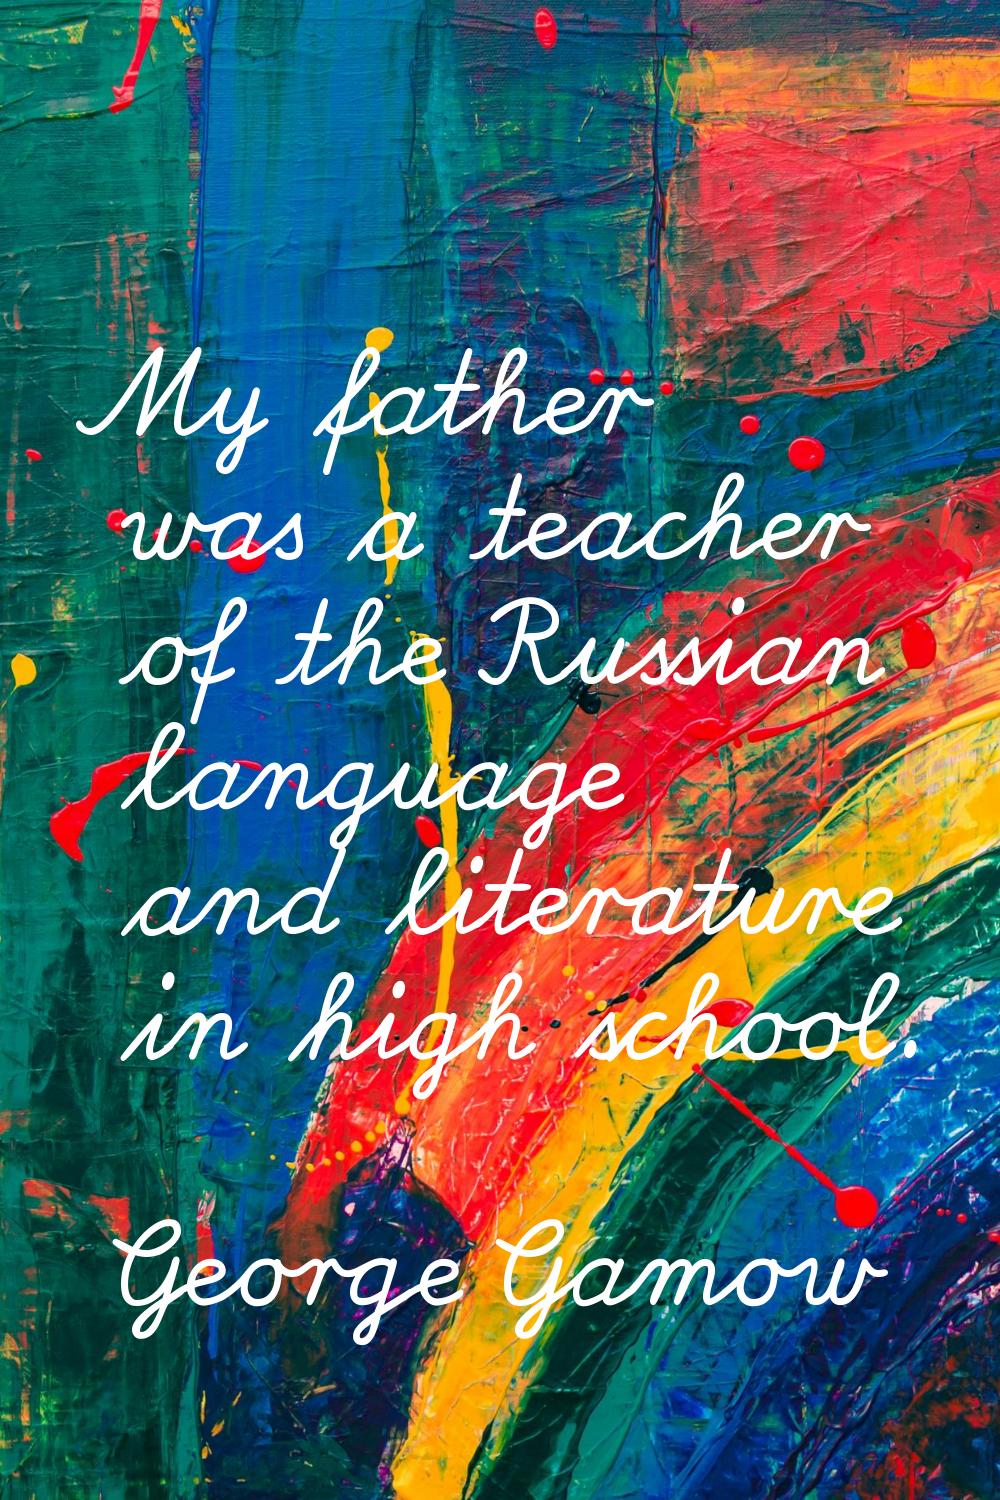 My father was a teacher of the Russian language and literature in high school.